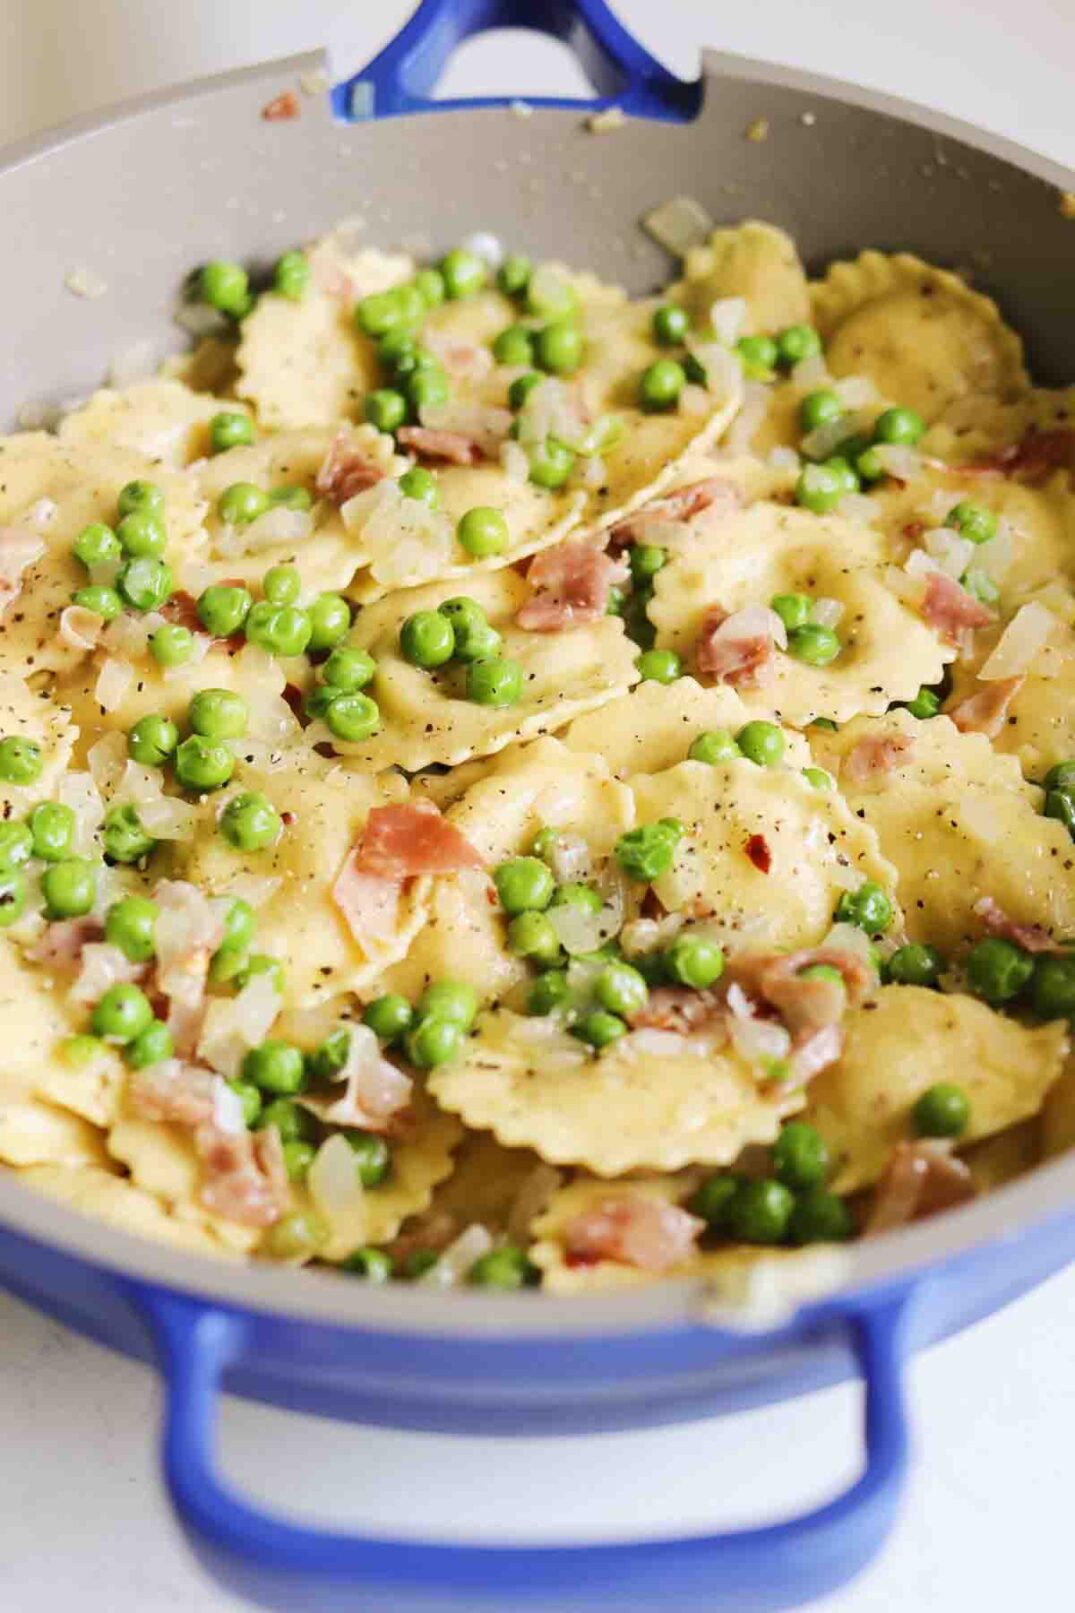 a blue pot filled with tiny green peas, pink crispy prosciutto and cream colored ravioli.